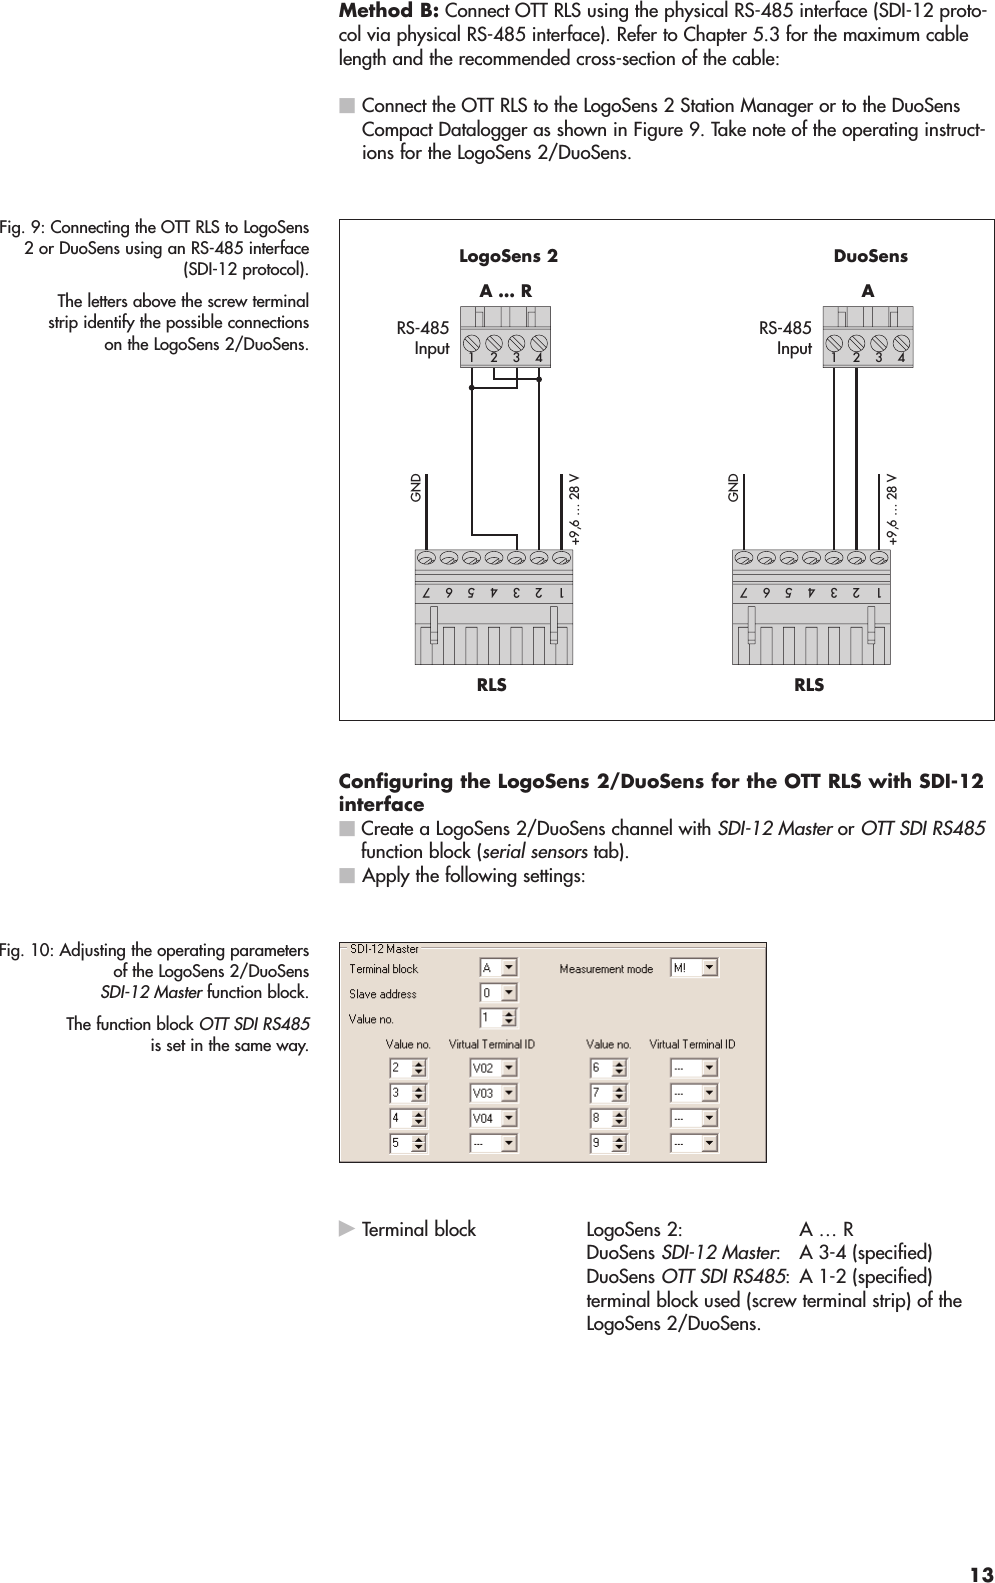 Method B: Connect OTT RLS using the physical RS-485 interface (SDI-12 proto-col via physical RS-485 interface). Refer to Chapter 5.3 for the maximum cablelength and the recommended cross-section of the cable:ⅥConnect the OTT RLS to the LogoSens 2 Station Manager or to the DuoSensCompact Datalogger as shown in Figure 9. Take note of the operating instruct-ions for the LogoSens 2/DuoSens.Configuring the LogoSens 2/DuoSens for the OTT RLS with SDI-12interfaceⅥCreate a LogoSens 2/DuoSens channel with SDI-12 Masteror OTT SDI RS485function block (serial sensorstab).ⅥApply the following settings:ᮣTerminal block LogoSens 2: A … R DuoSens SDI-12 Master: A 3-4 (specified) DuoSens OTT SDI RS485: A 1-2 (specified)terminal block used (screw terminal strip) of theLogoSens 2/DuoSens.Fig. 10: Adjusting the operating parametersof the LogoSens 2/DuoSensSDI-12 Master function block.The function block OTT SDI RS485is set in the same way.RS-485InputA … R4312 LogoSens 2RS-485InputARLS4312 DuoSensRLS54231765423176GND+9,6 … 28 VGND+9,6 … 28 VFig. 9: Connecting the OTT RLS to LogoSens2 or DuoSens using an RS-485 interface(SDI-12 protocol).The letters above the screw terminalstrip identify the possible connectionson the LogoSens 2/DuoSens.13